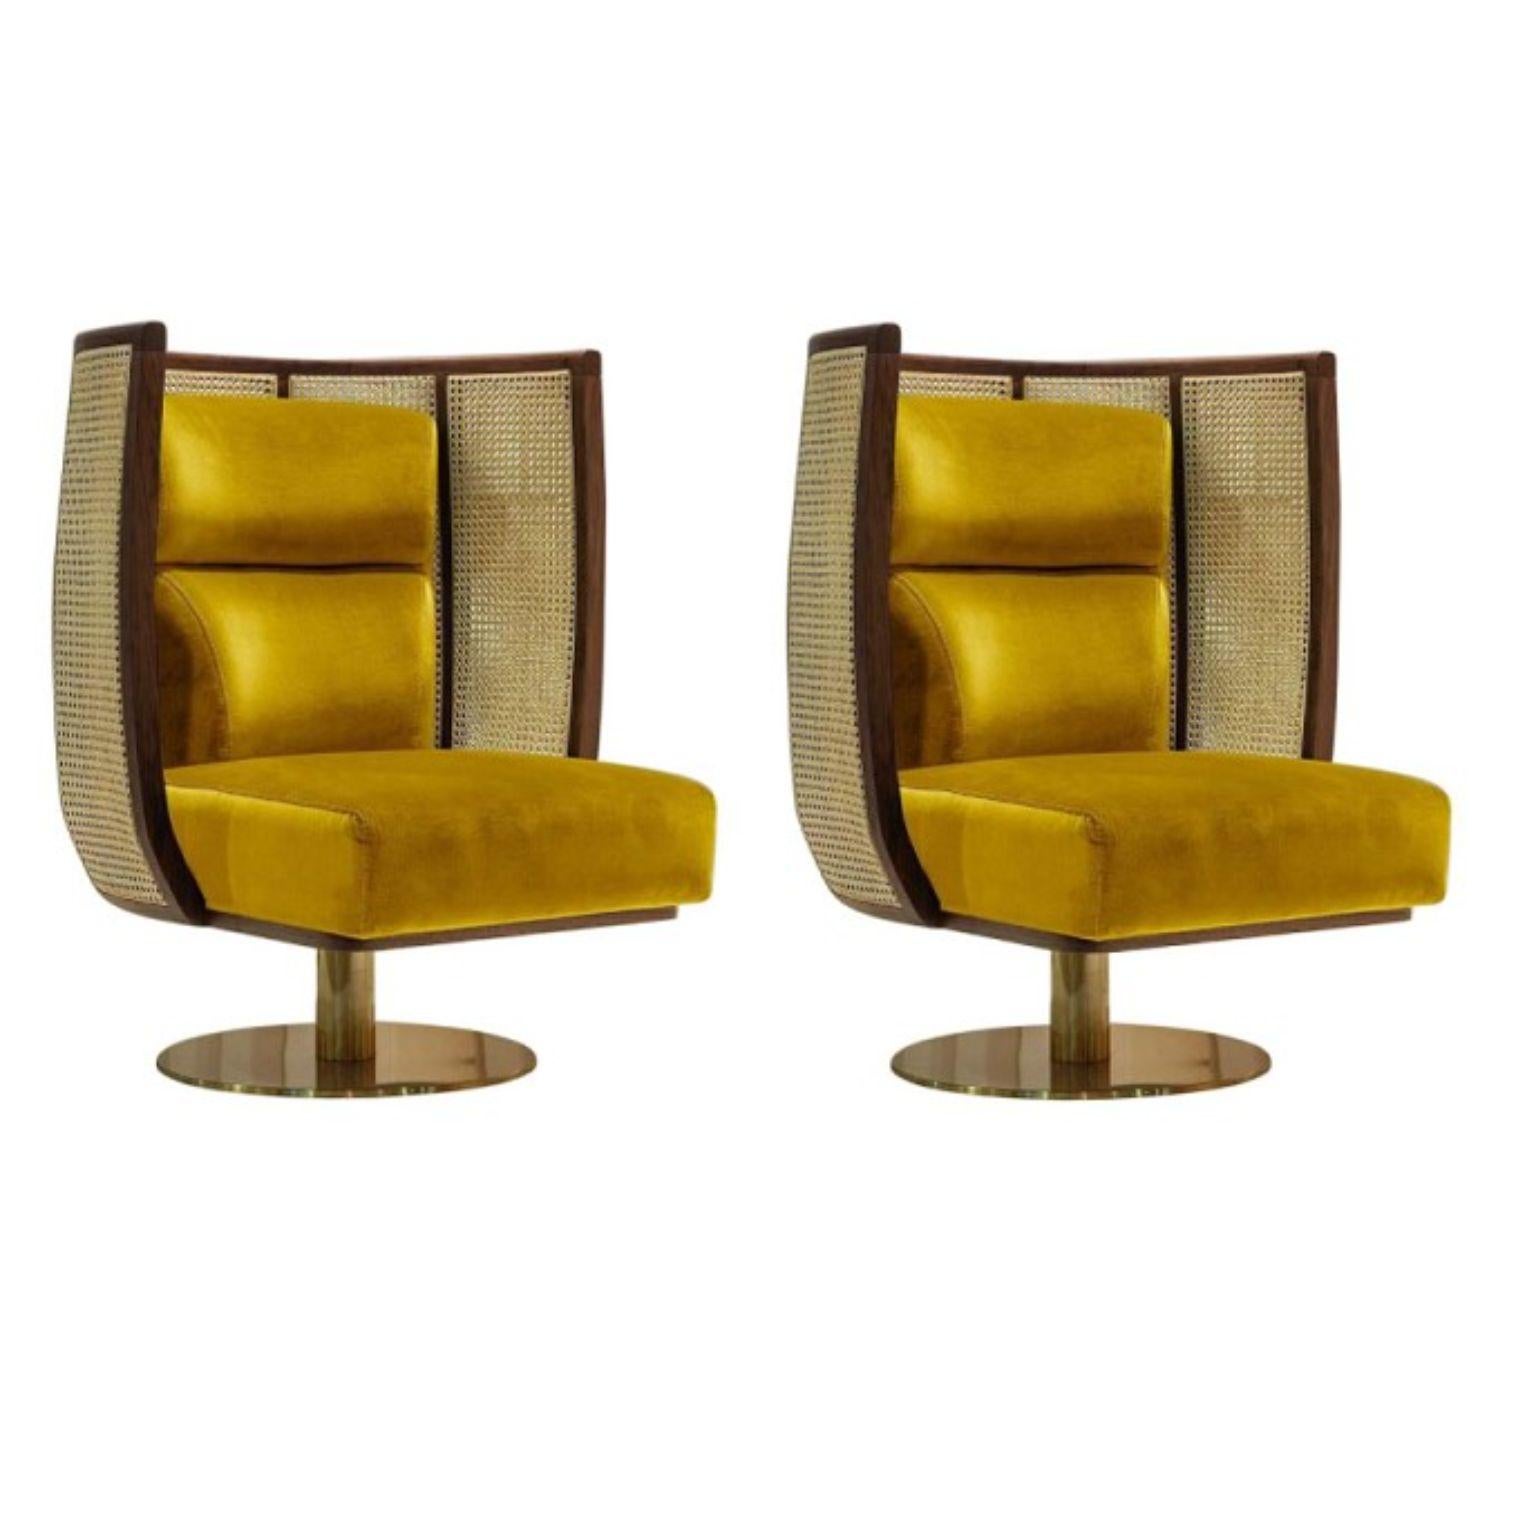 Set of 2 Egoista Armchairs by Dooq
Measures: W 80 cm 32”
D 80 cm 32”
H 100 cm 39”
seat height 40 cm 16”

Materials: upholstery fabric or leather; structure solid wood feet lacquered MDF or solid wood rattan natural rattan. COM with natural walnut or